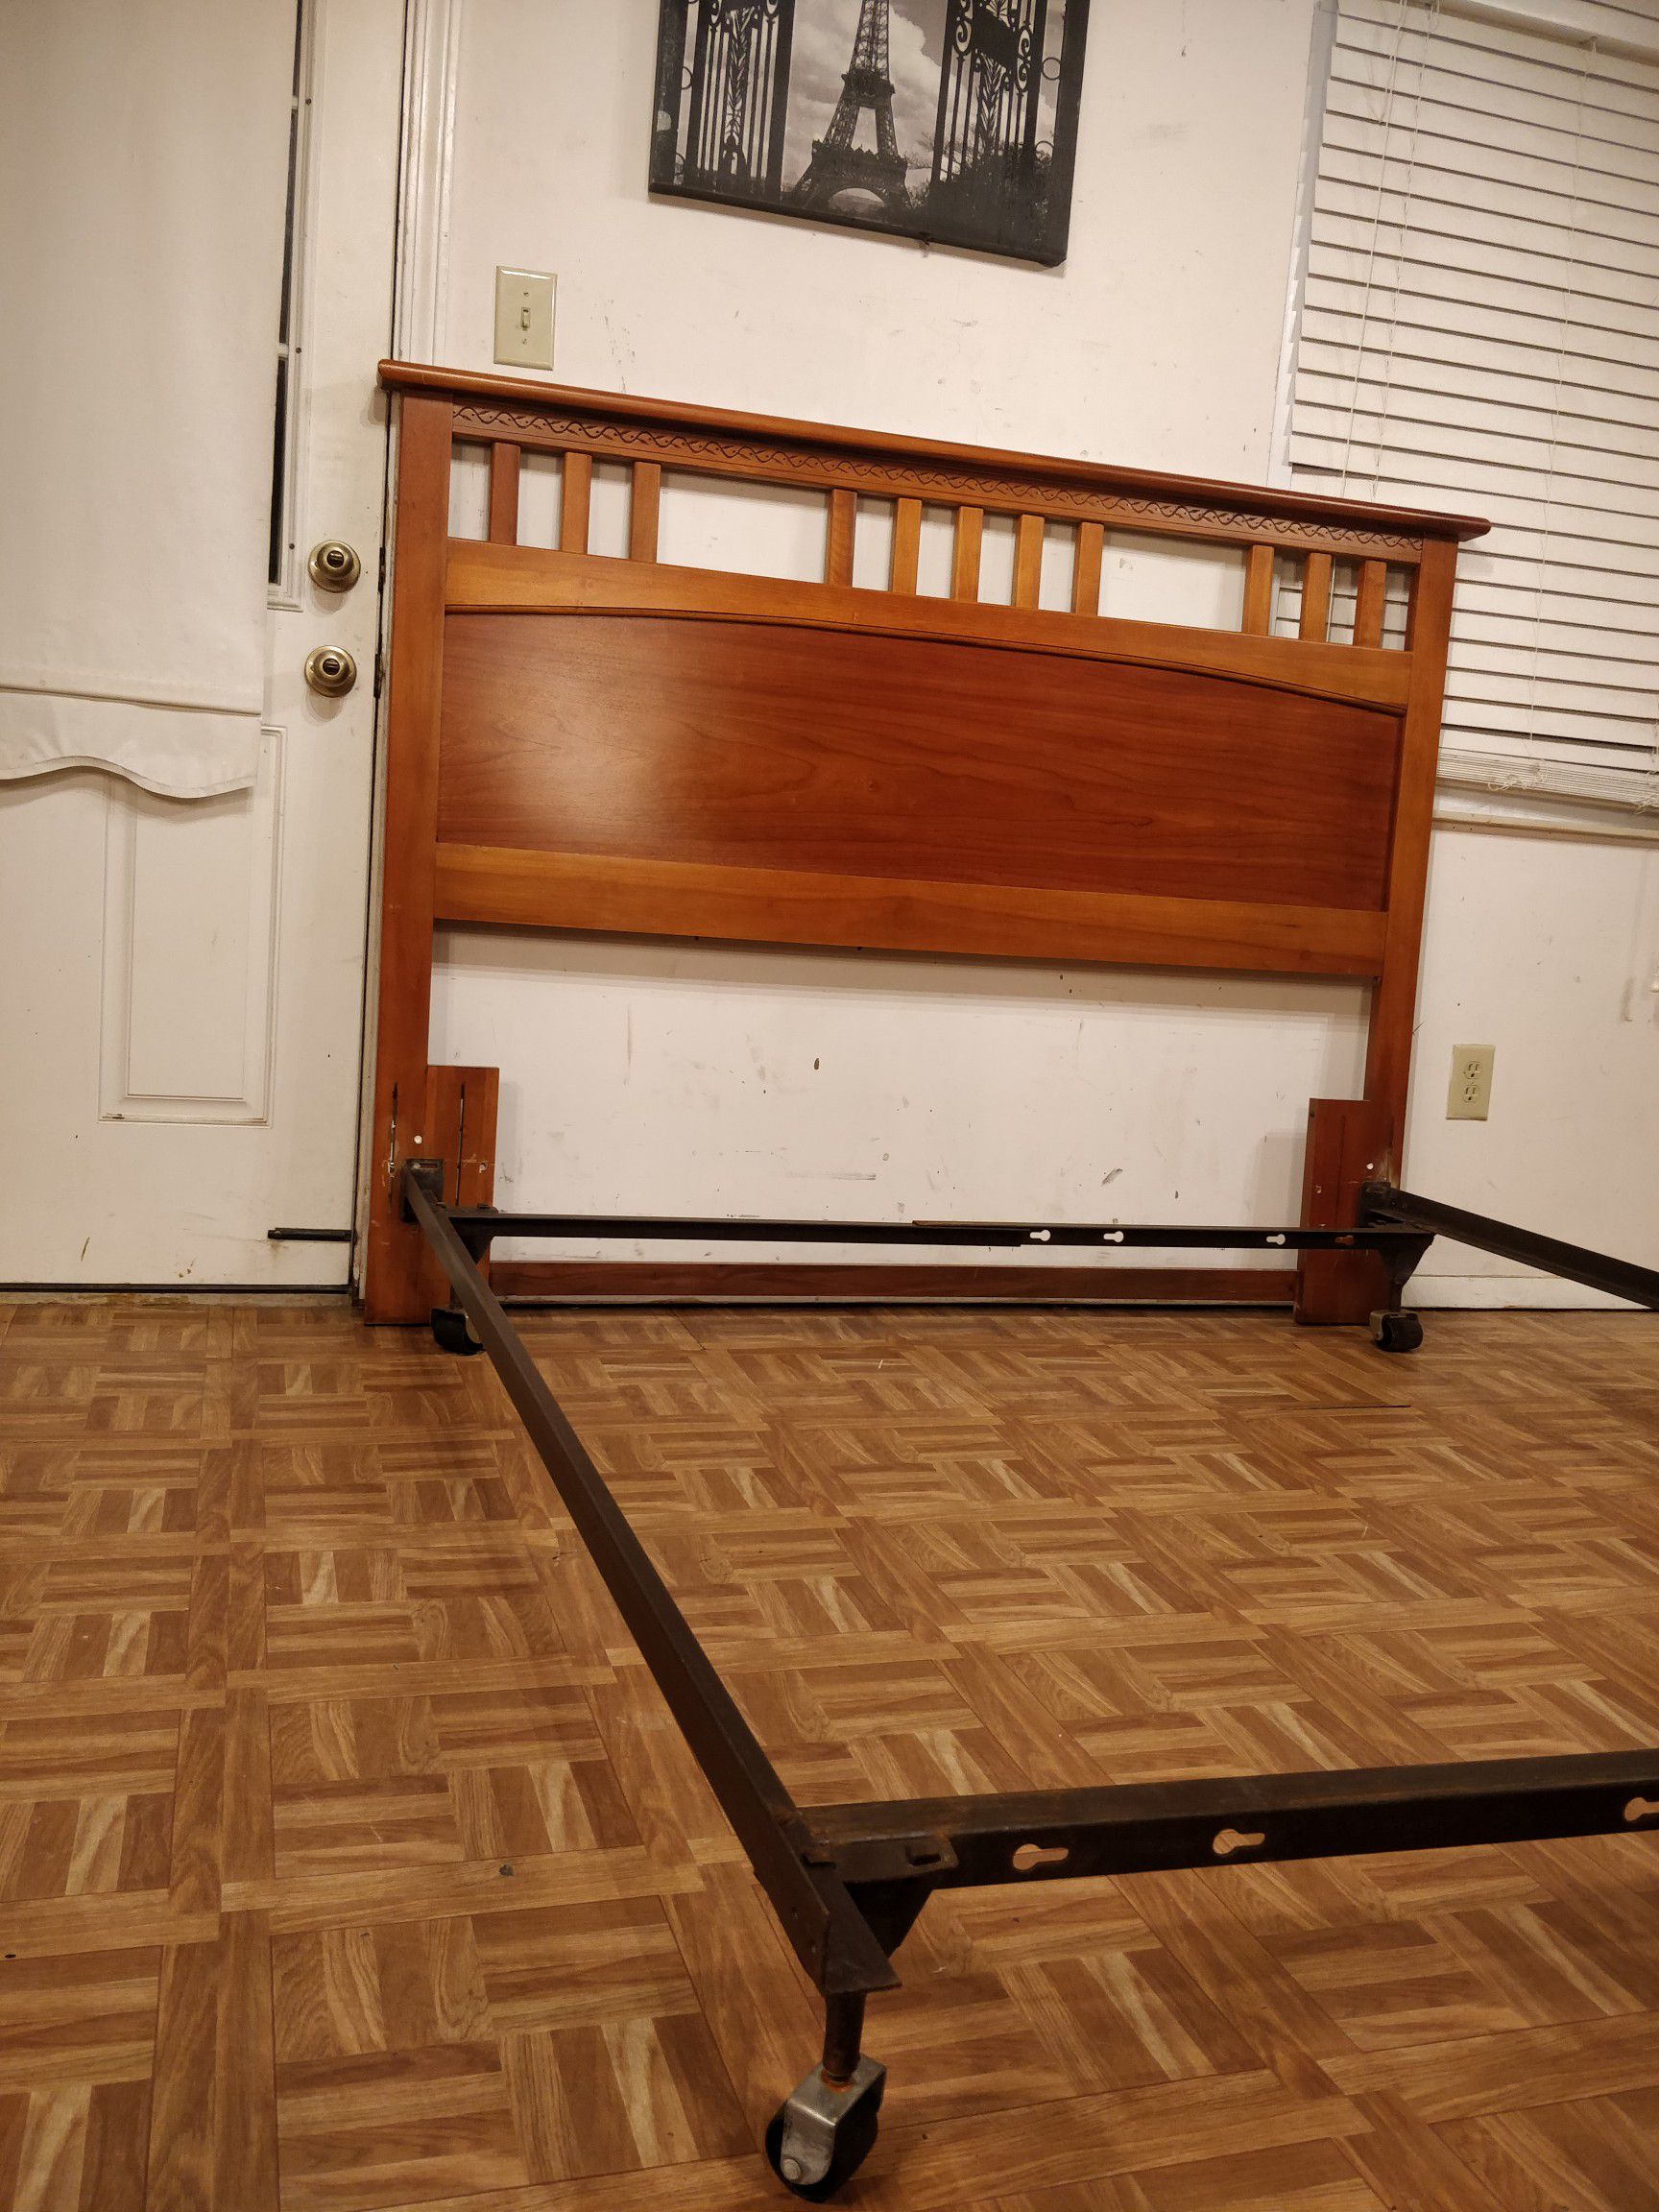 Queen/full wooden headboard with full box spring metal base in good condition, driveway pickup.